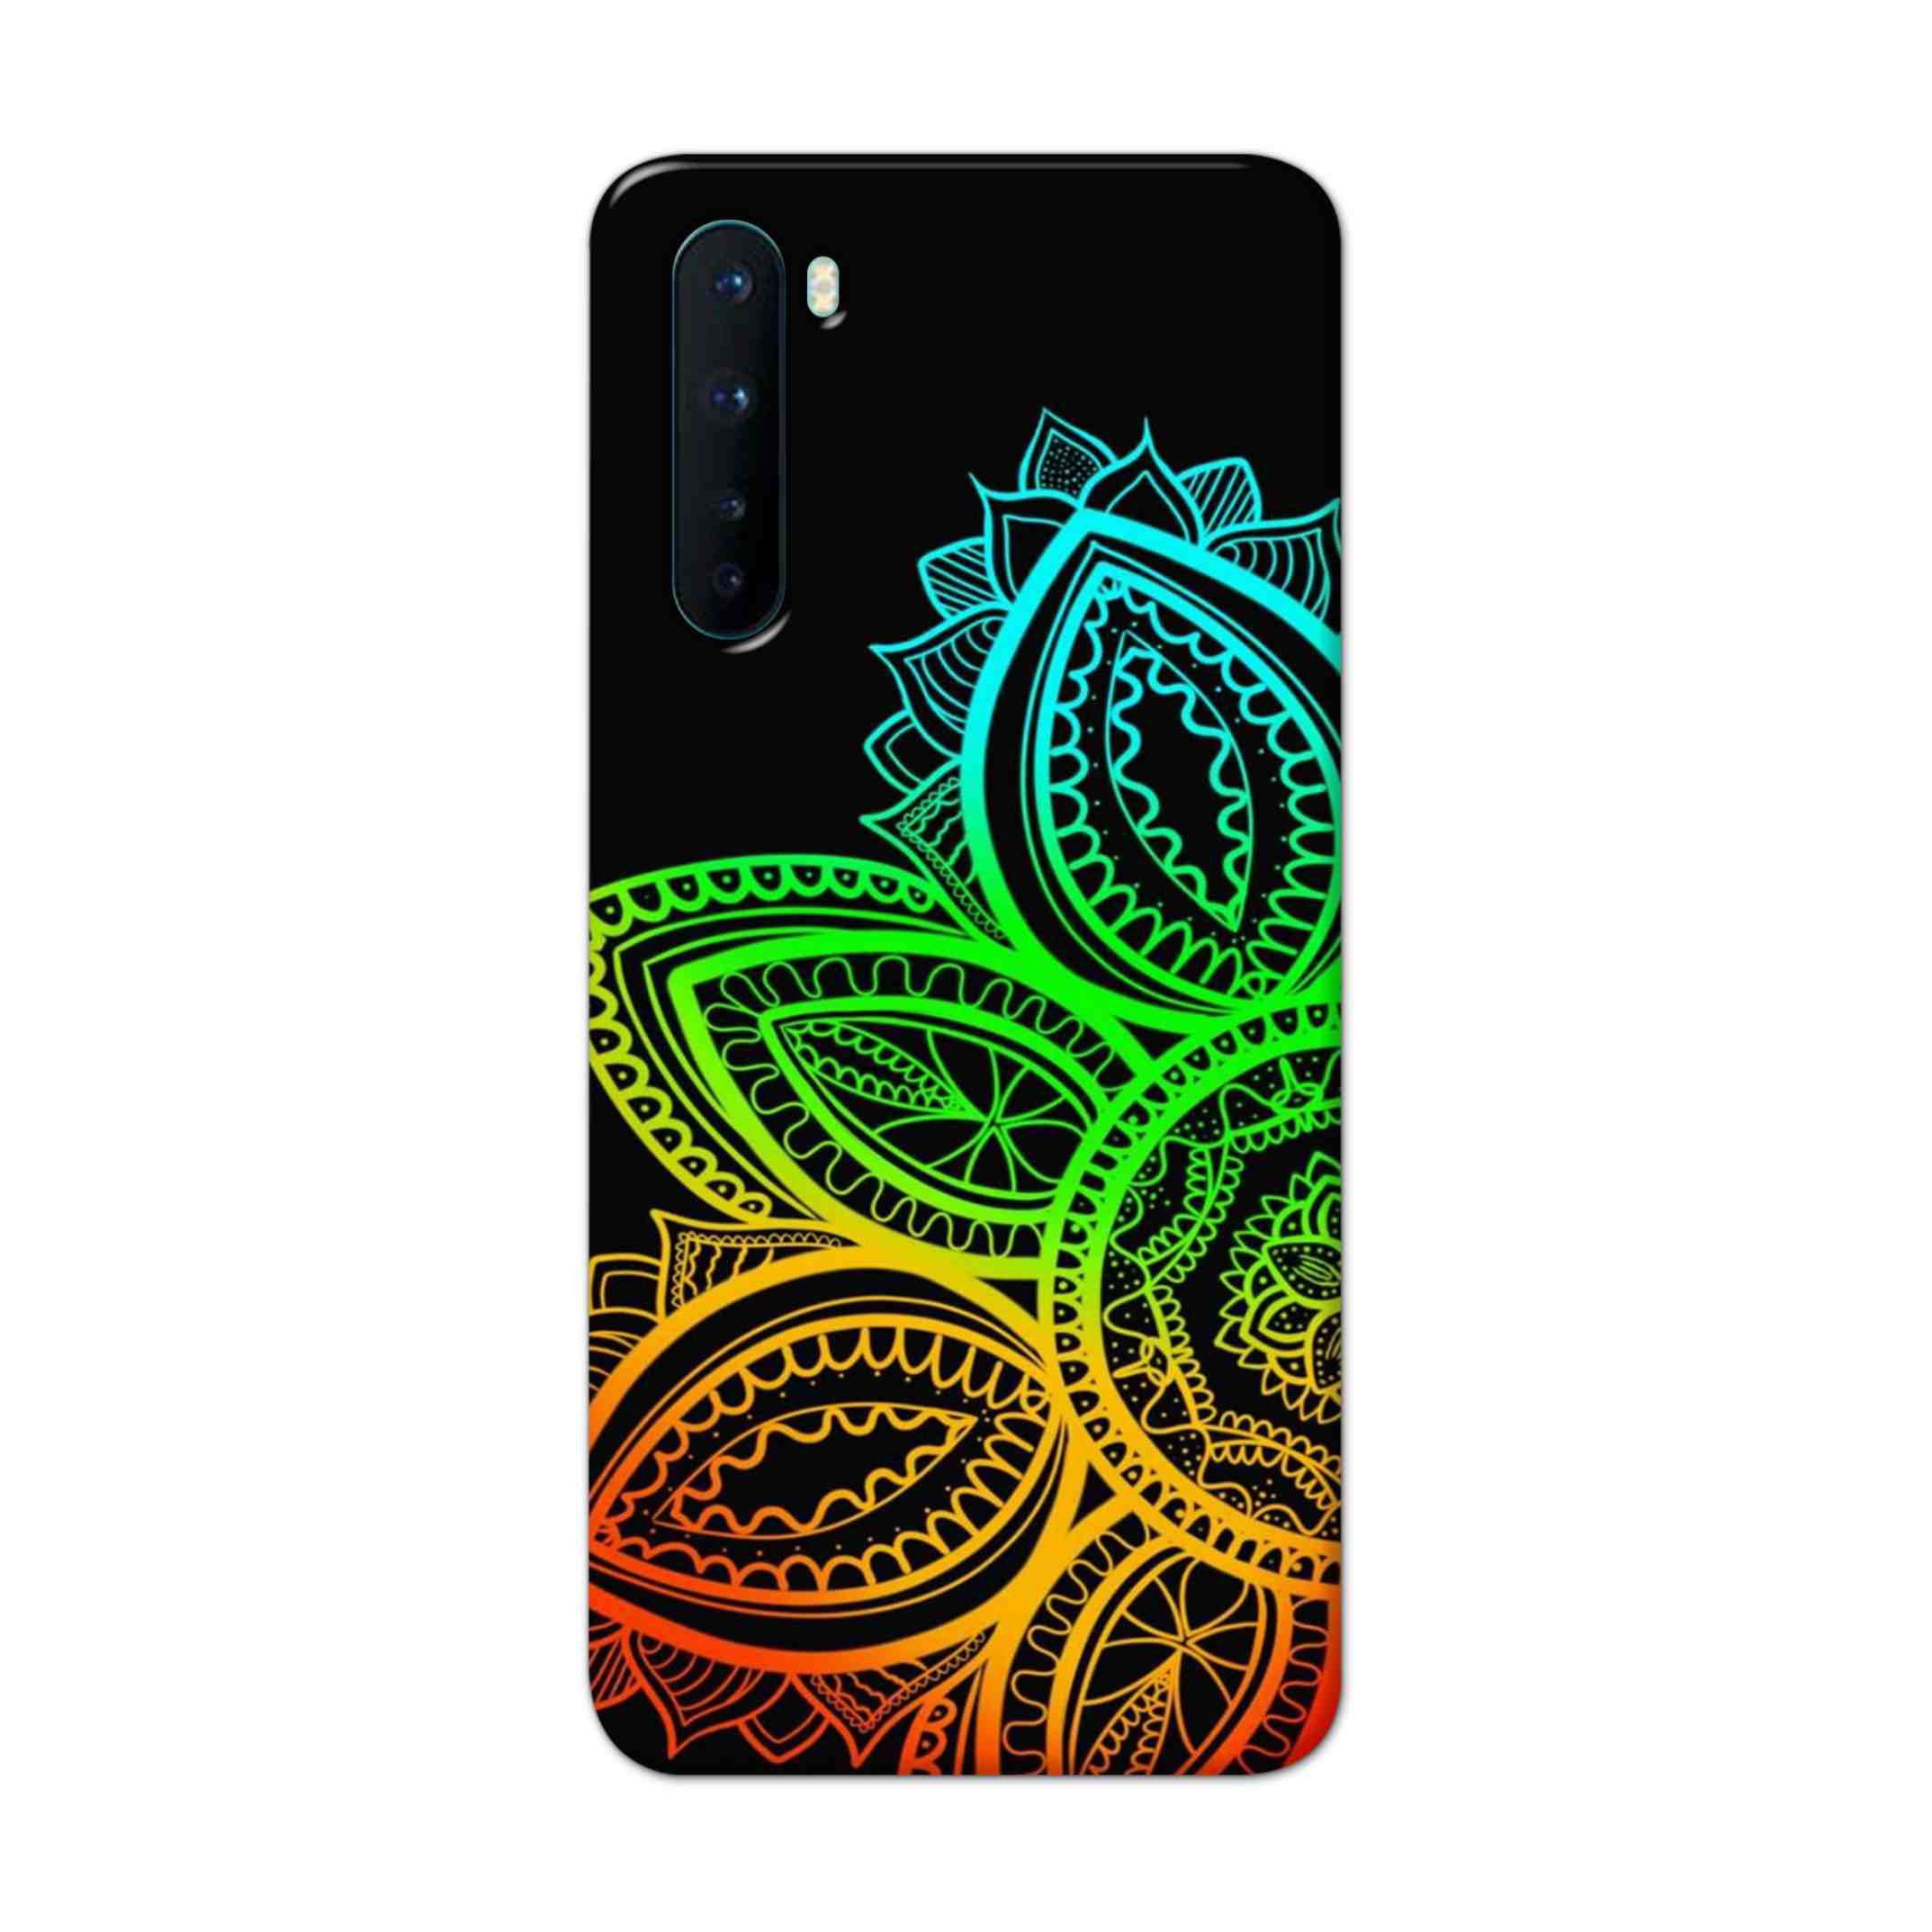 Buy Neon Mandala Hard Back Mobile Phone Case Cover For OnePlus Nord Online